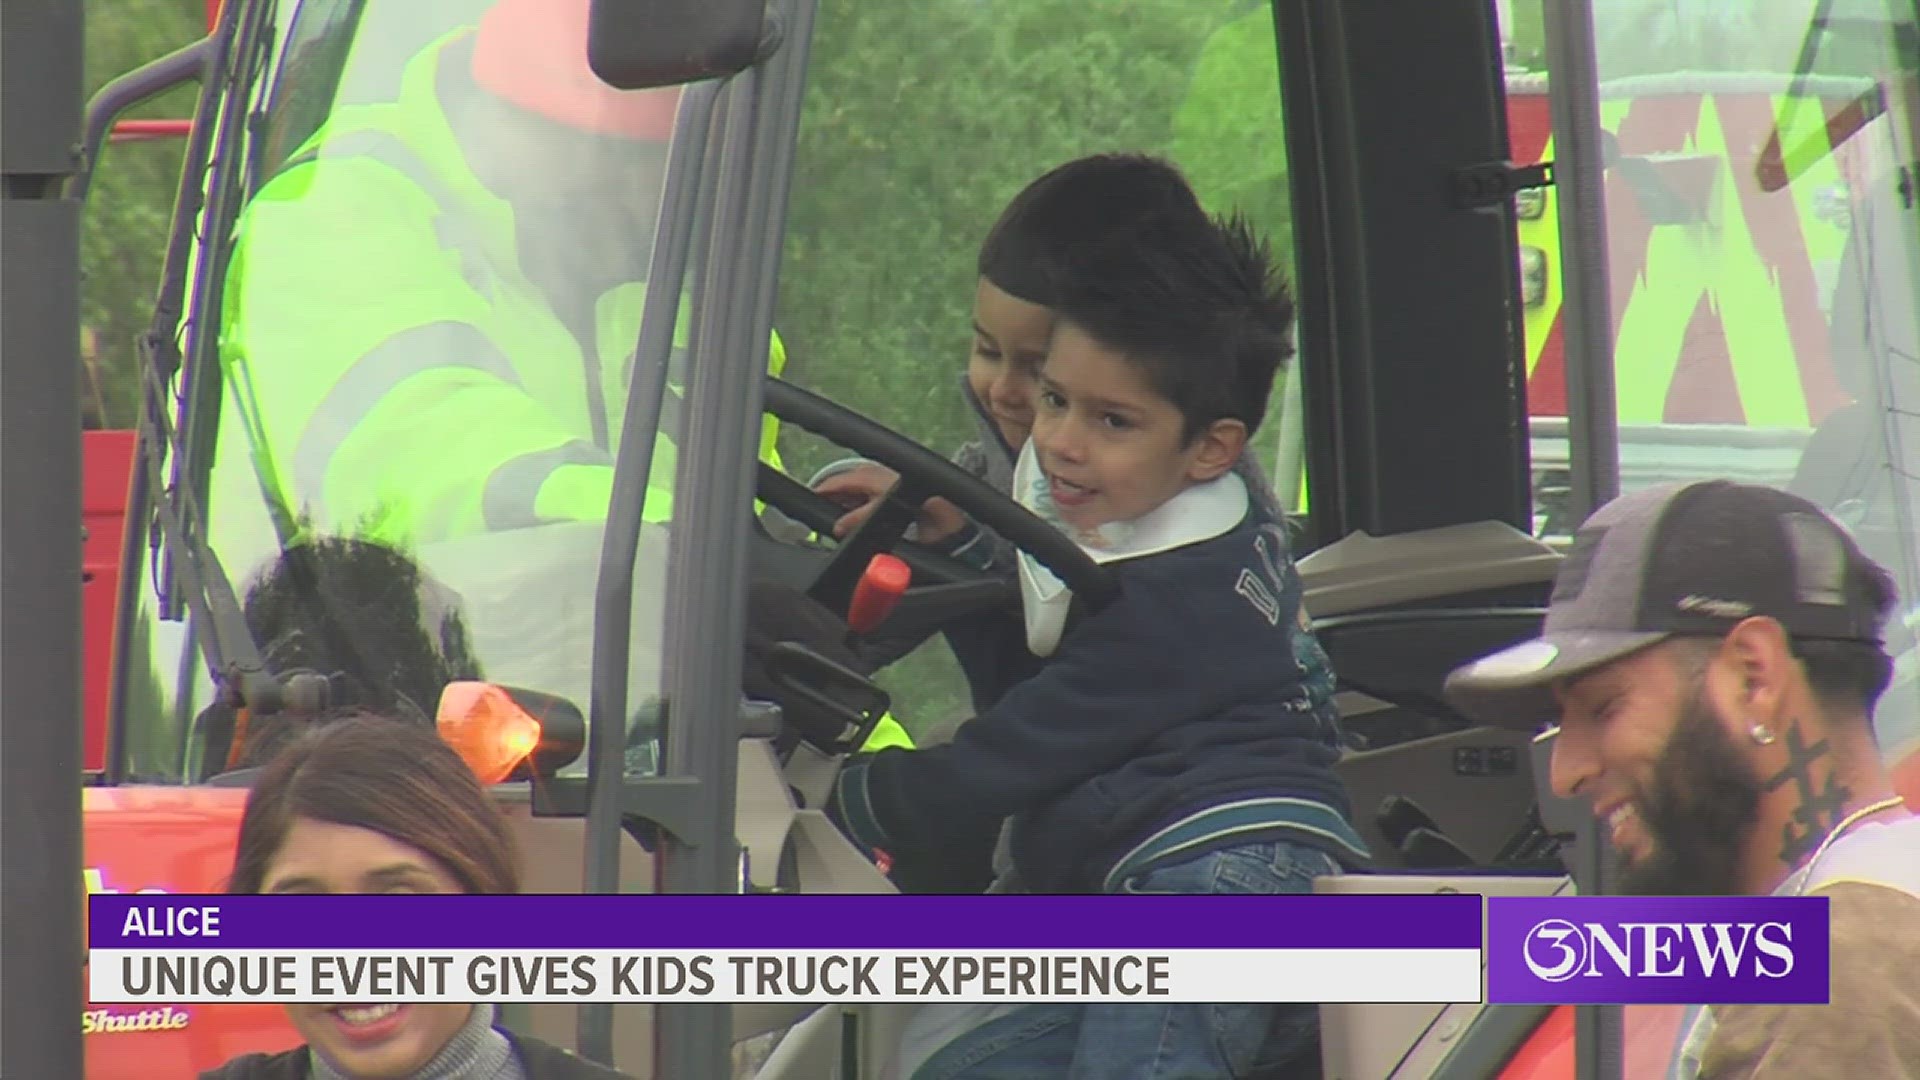 Touch-a-Truck event in Alice provides kids hands-on education